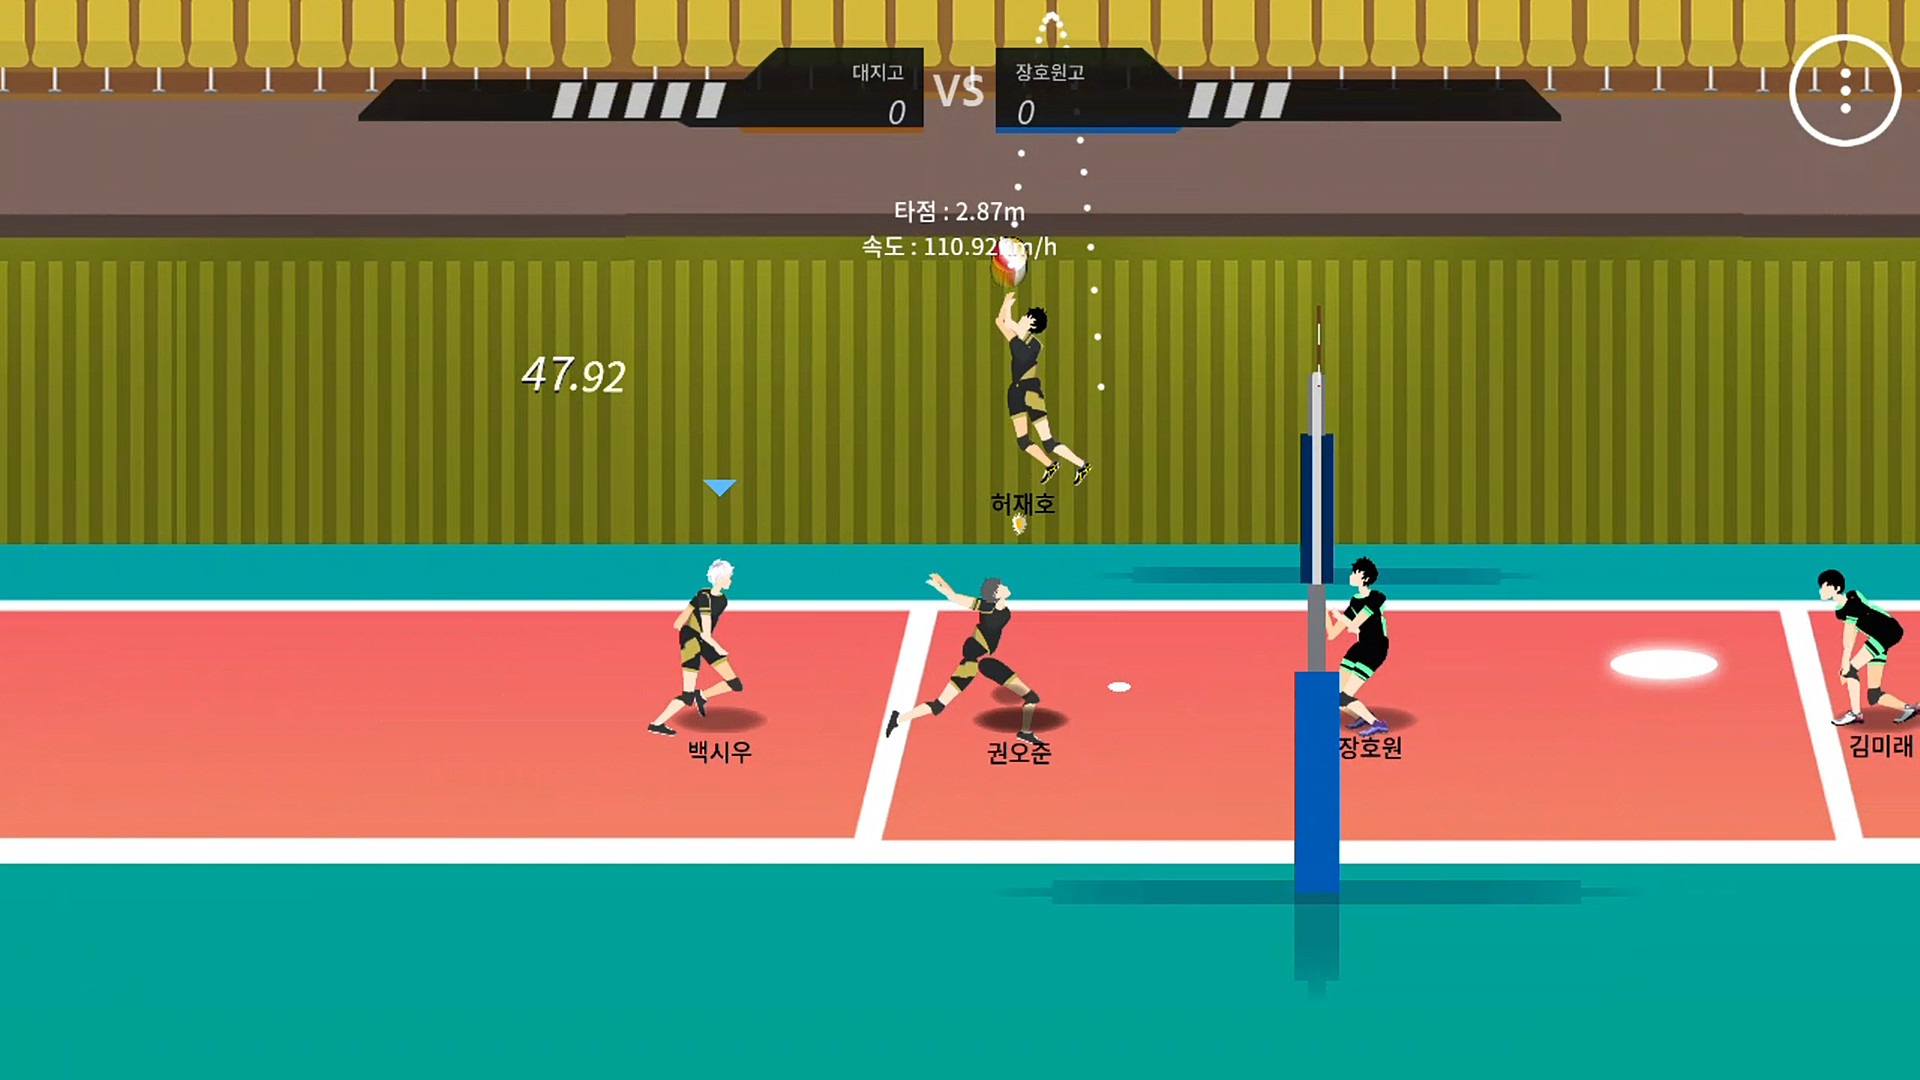 The spike volleyball story мод. Игра the Spike. The Spike Volleyball story на ПК. The Spike Volleyball story. Последняя версия the Spike Volleyball story на ПК.